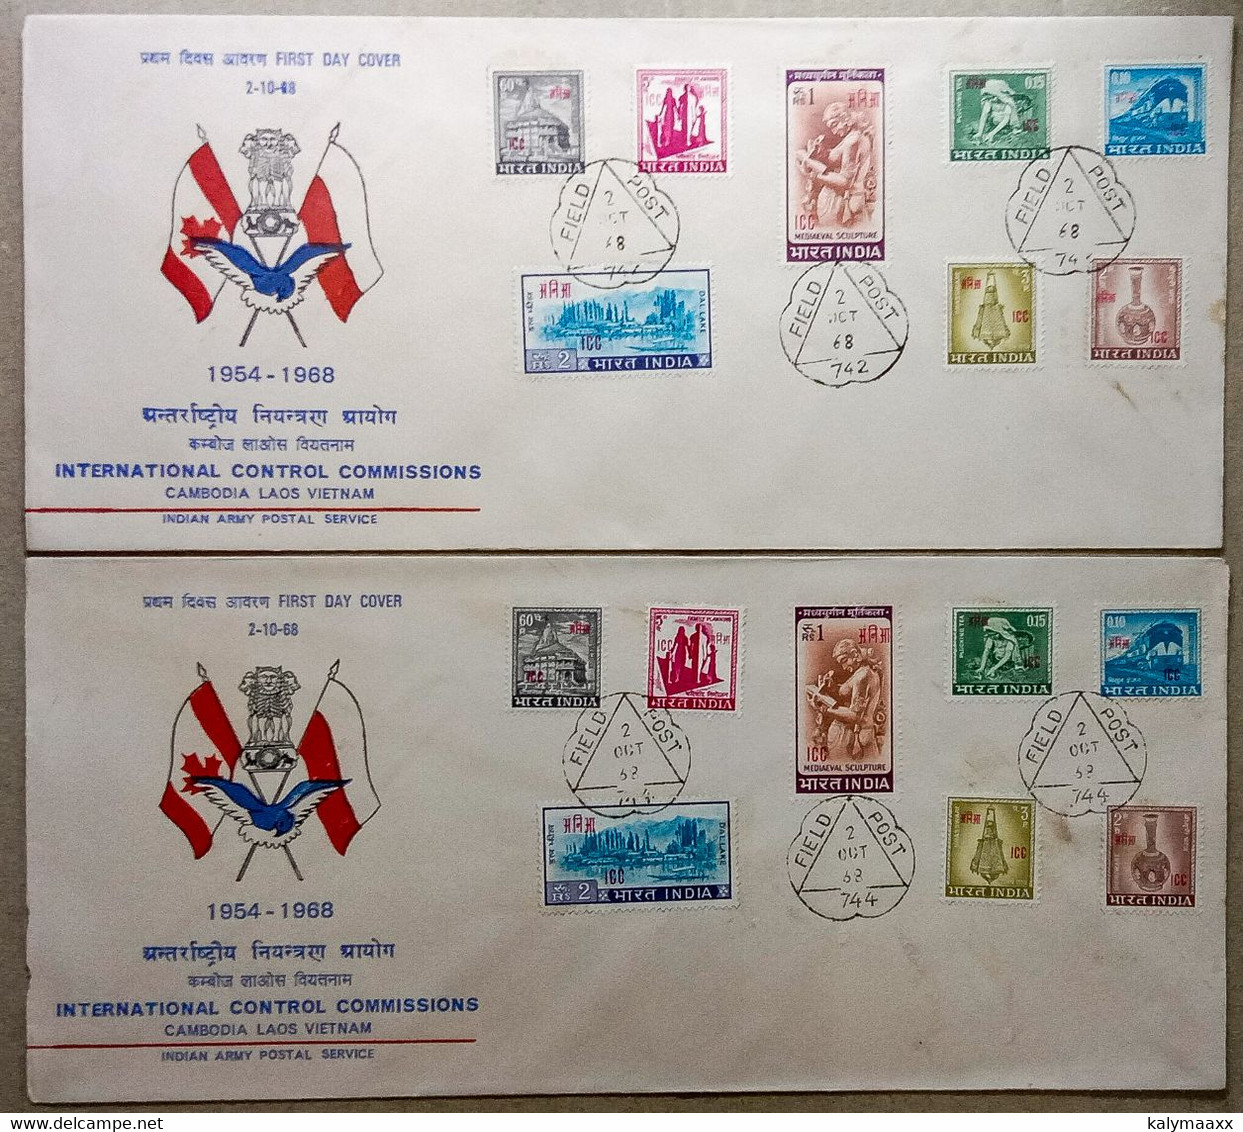 INDIA 1968 ICC OVERPRINTED COMPLETE SET OF 2 F.P.O CANCELLED COVERS & INFORMATION BROCHURE, VIETNAM, LAOS, CAMBODIA - Franchigia Militare